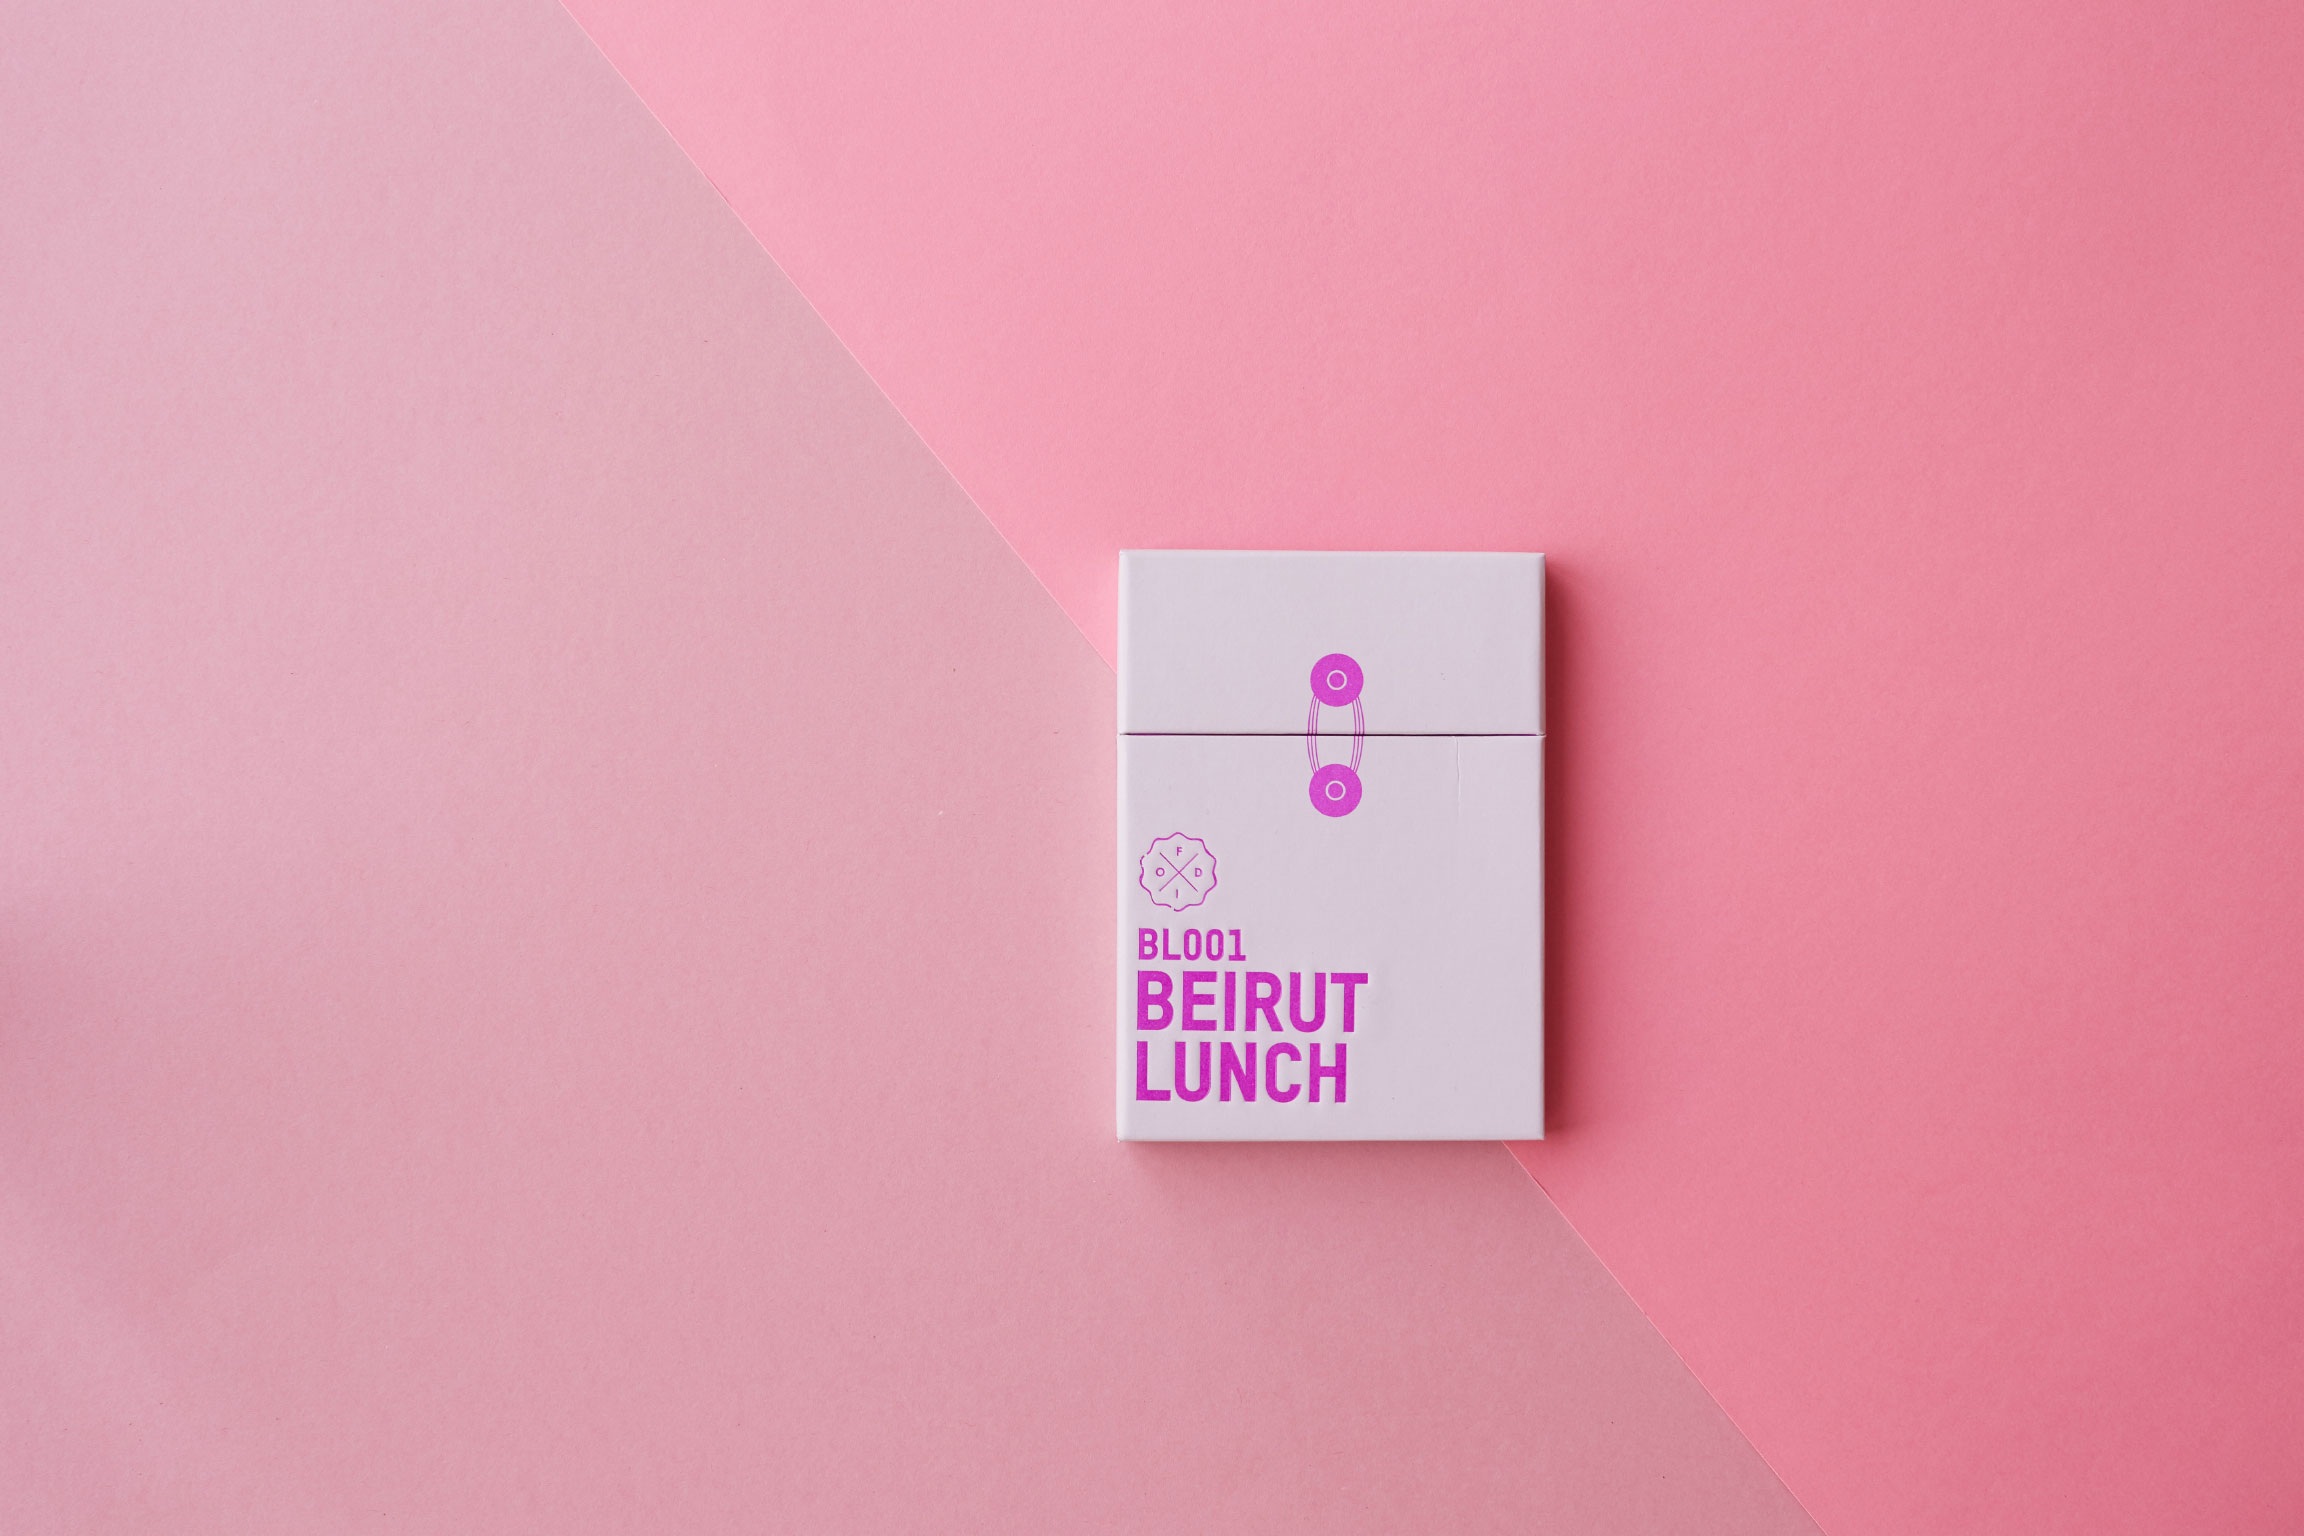 BL001 BEIRUT LUNCH (Sold Out)